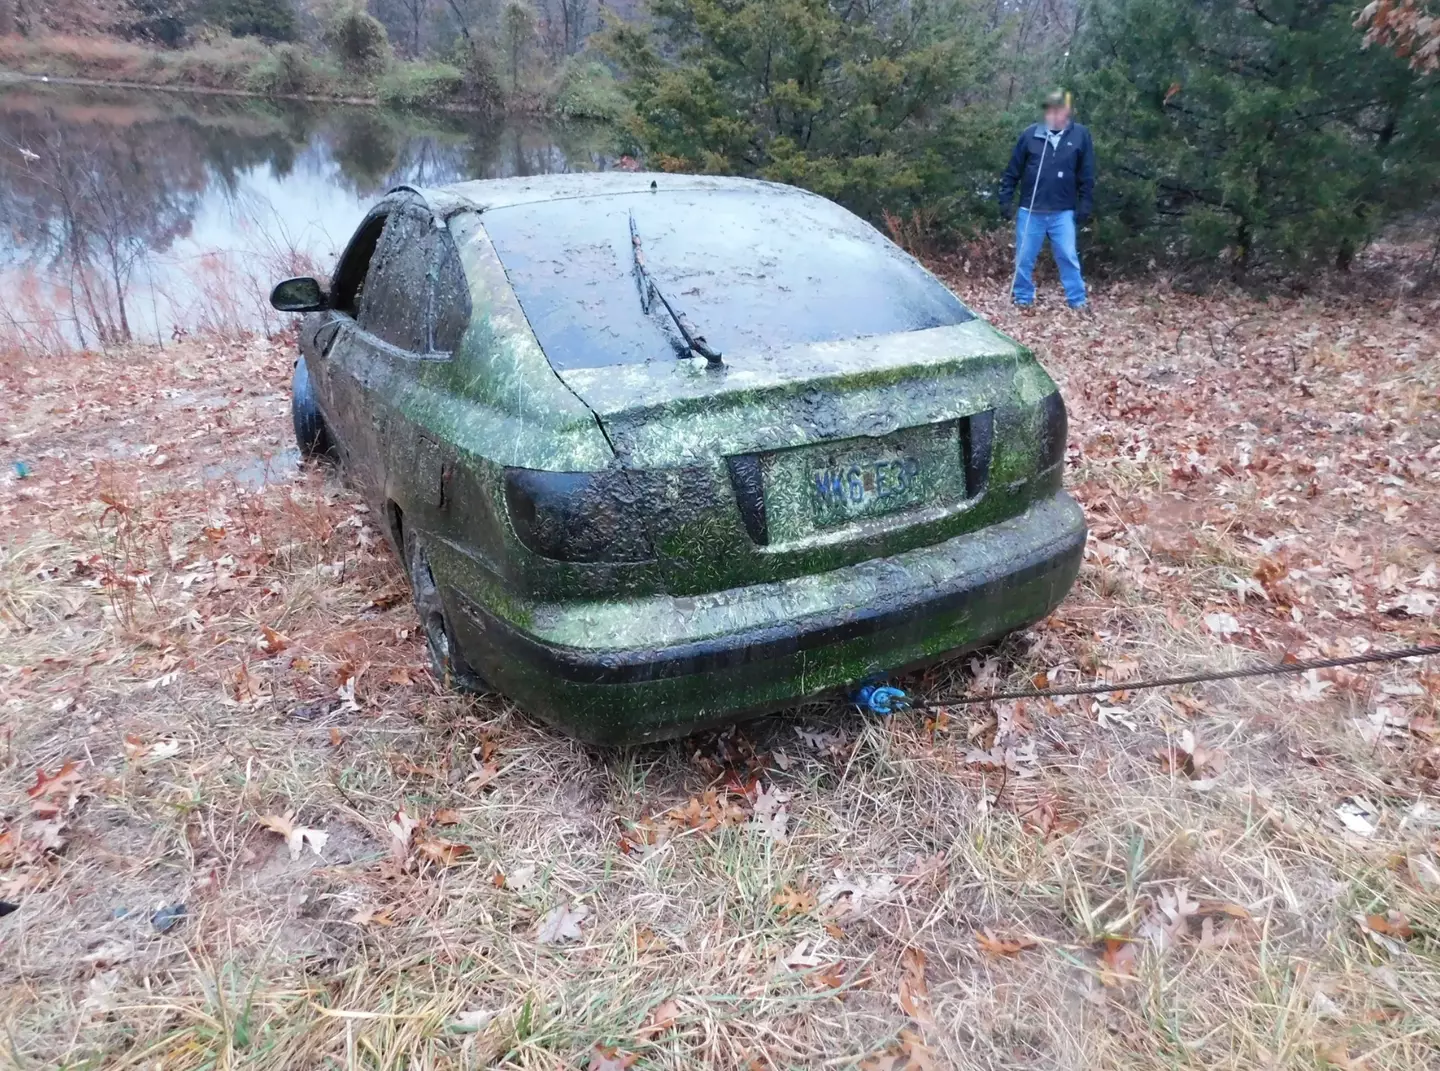 YouTuber James Hinkle came across Erwin's car while using freshwater mapping technology to search for the missing man.